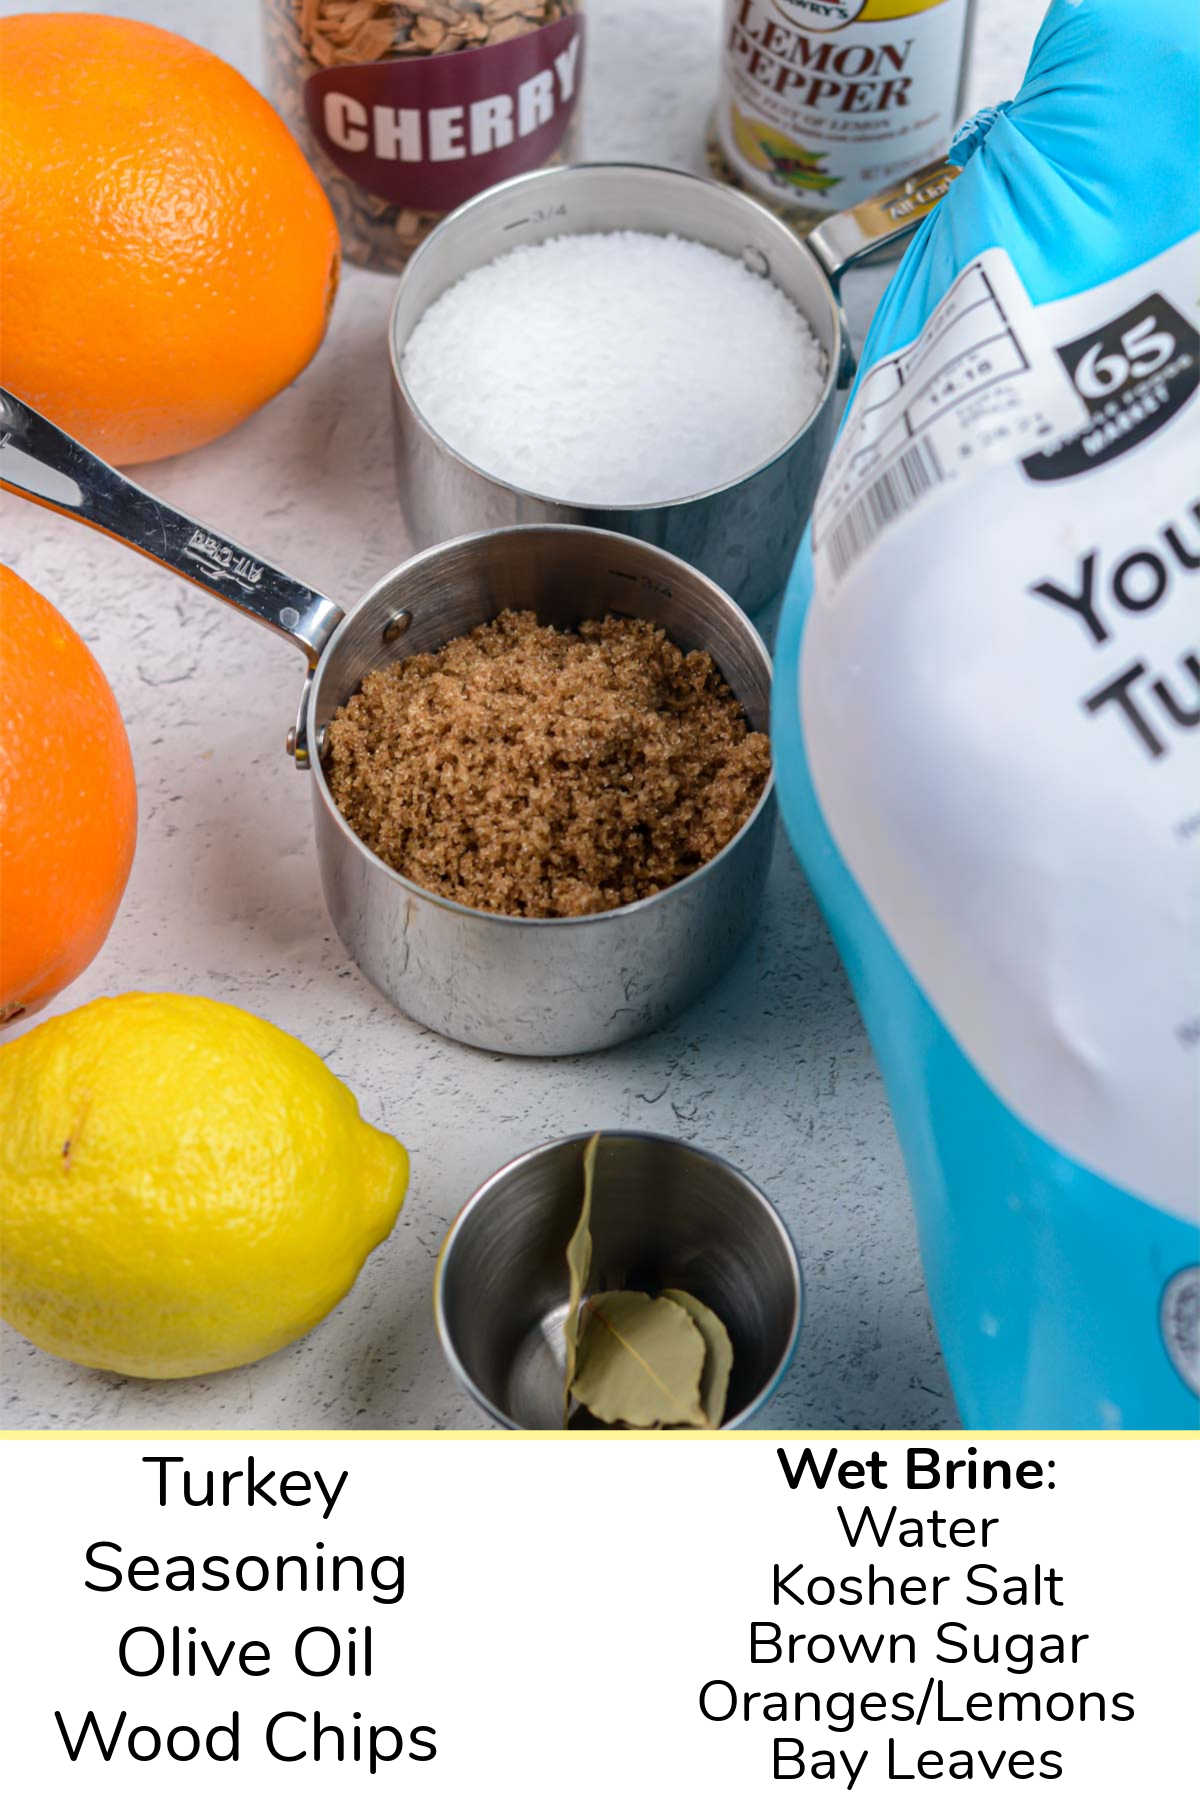 smoked turkey ingredient photo showing the turkey, seasoning and ingredients for the brine with labels.